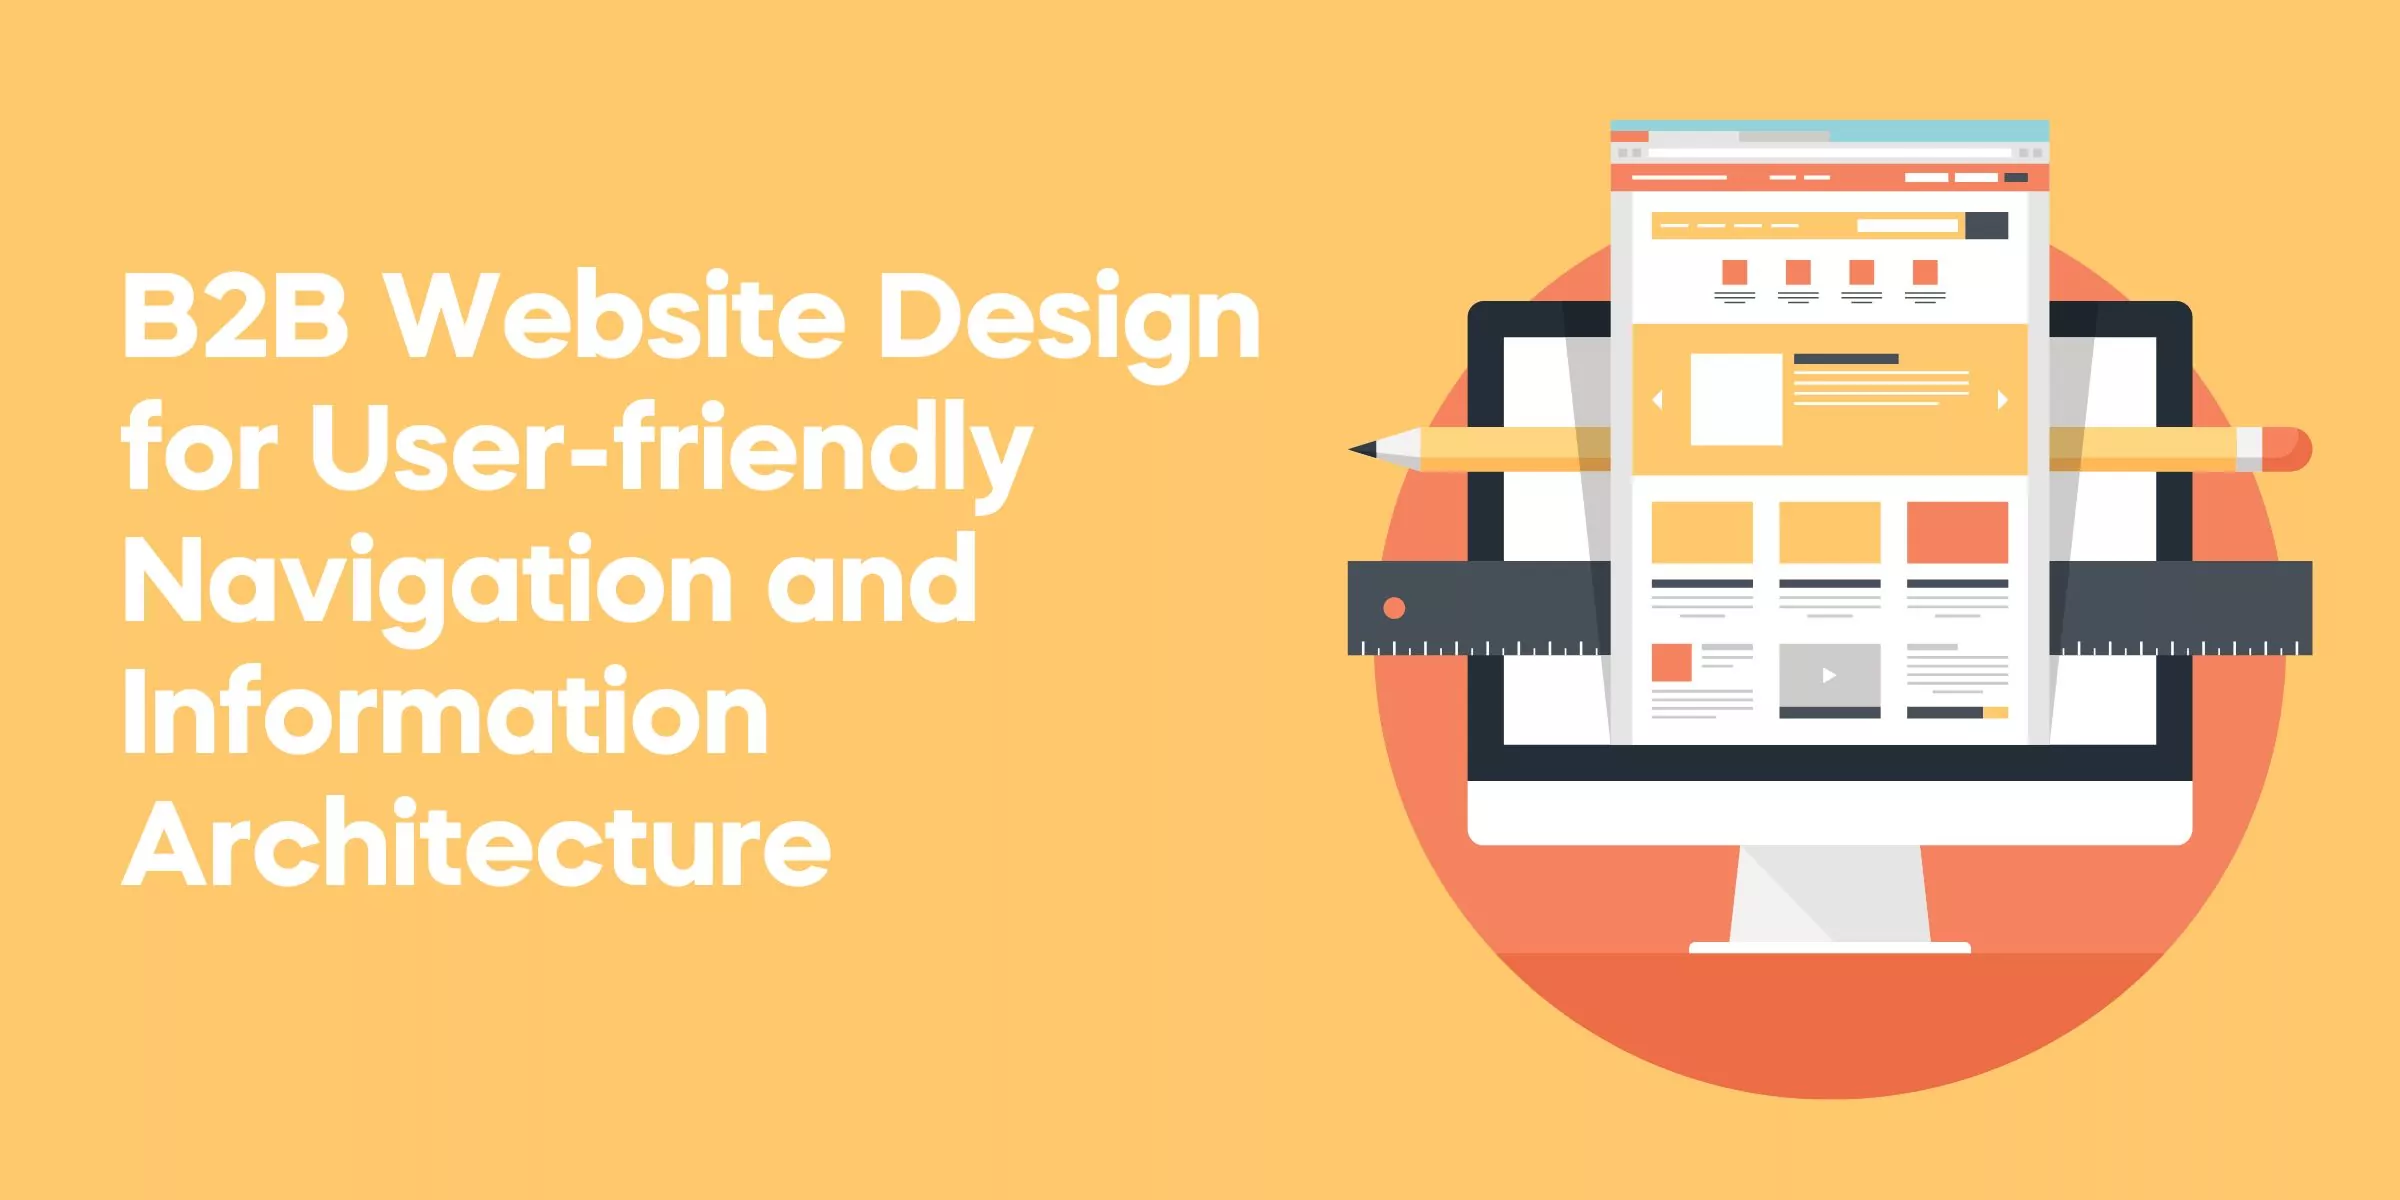 B2B Website Design for User-friendly Navigation and Information Architecture